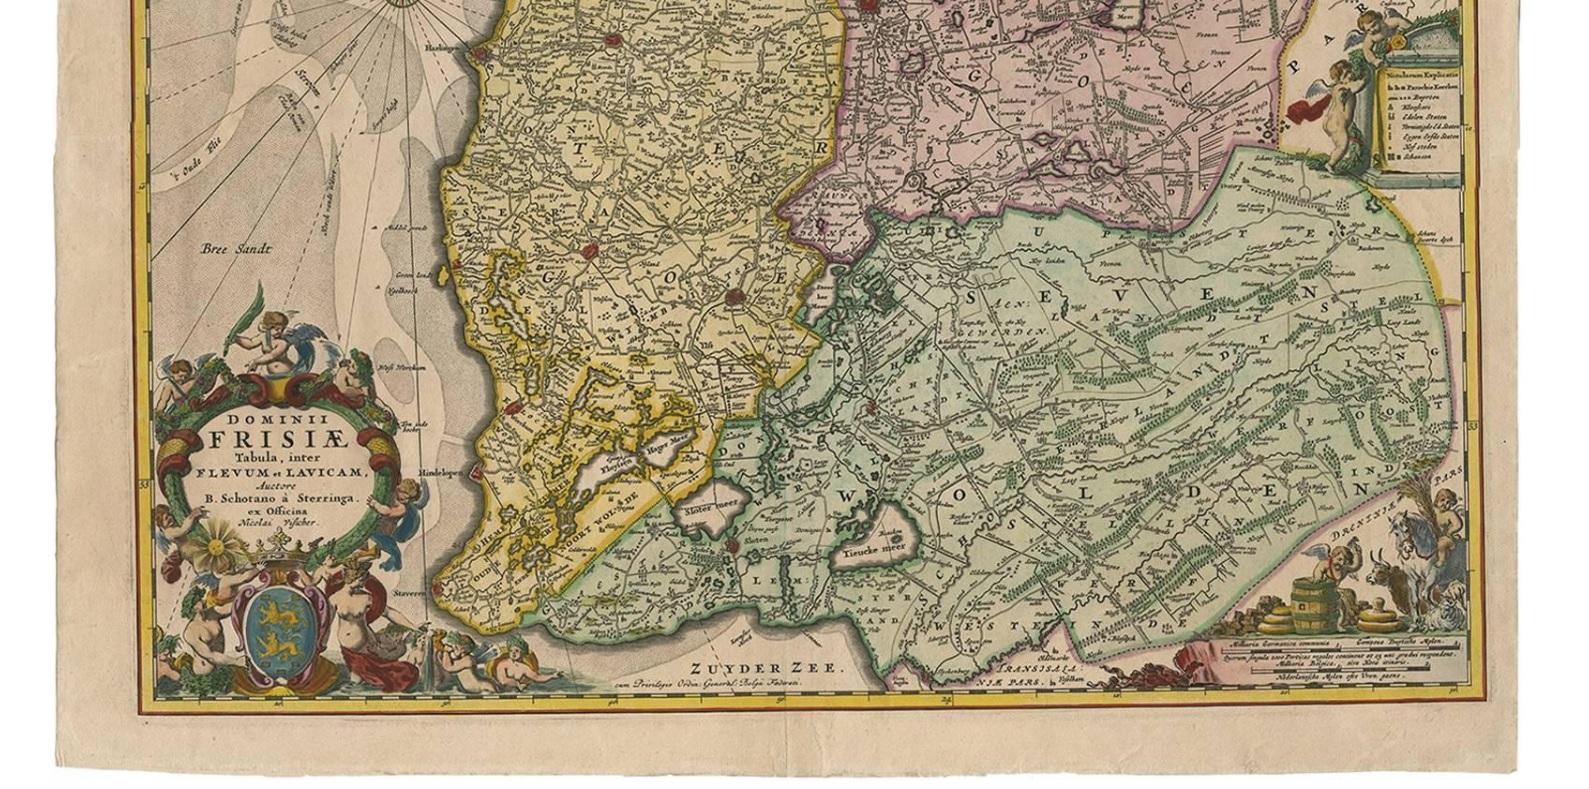 This large copper engraved map details the coastline of Friesland and Terschelling. At east is a part of Groningen. The main cities are colored in red. The very decorative cartouches displays putti and a coat of arms. At the right corner there is an